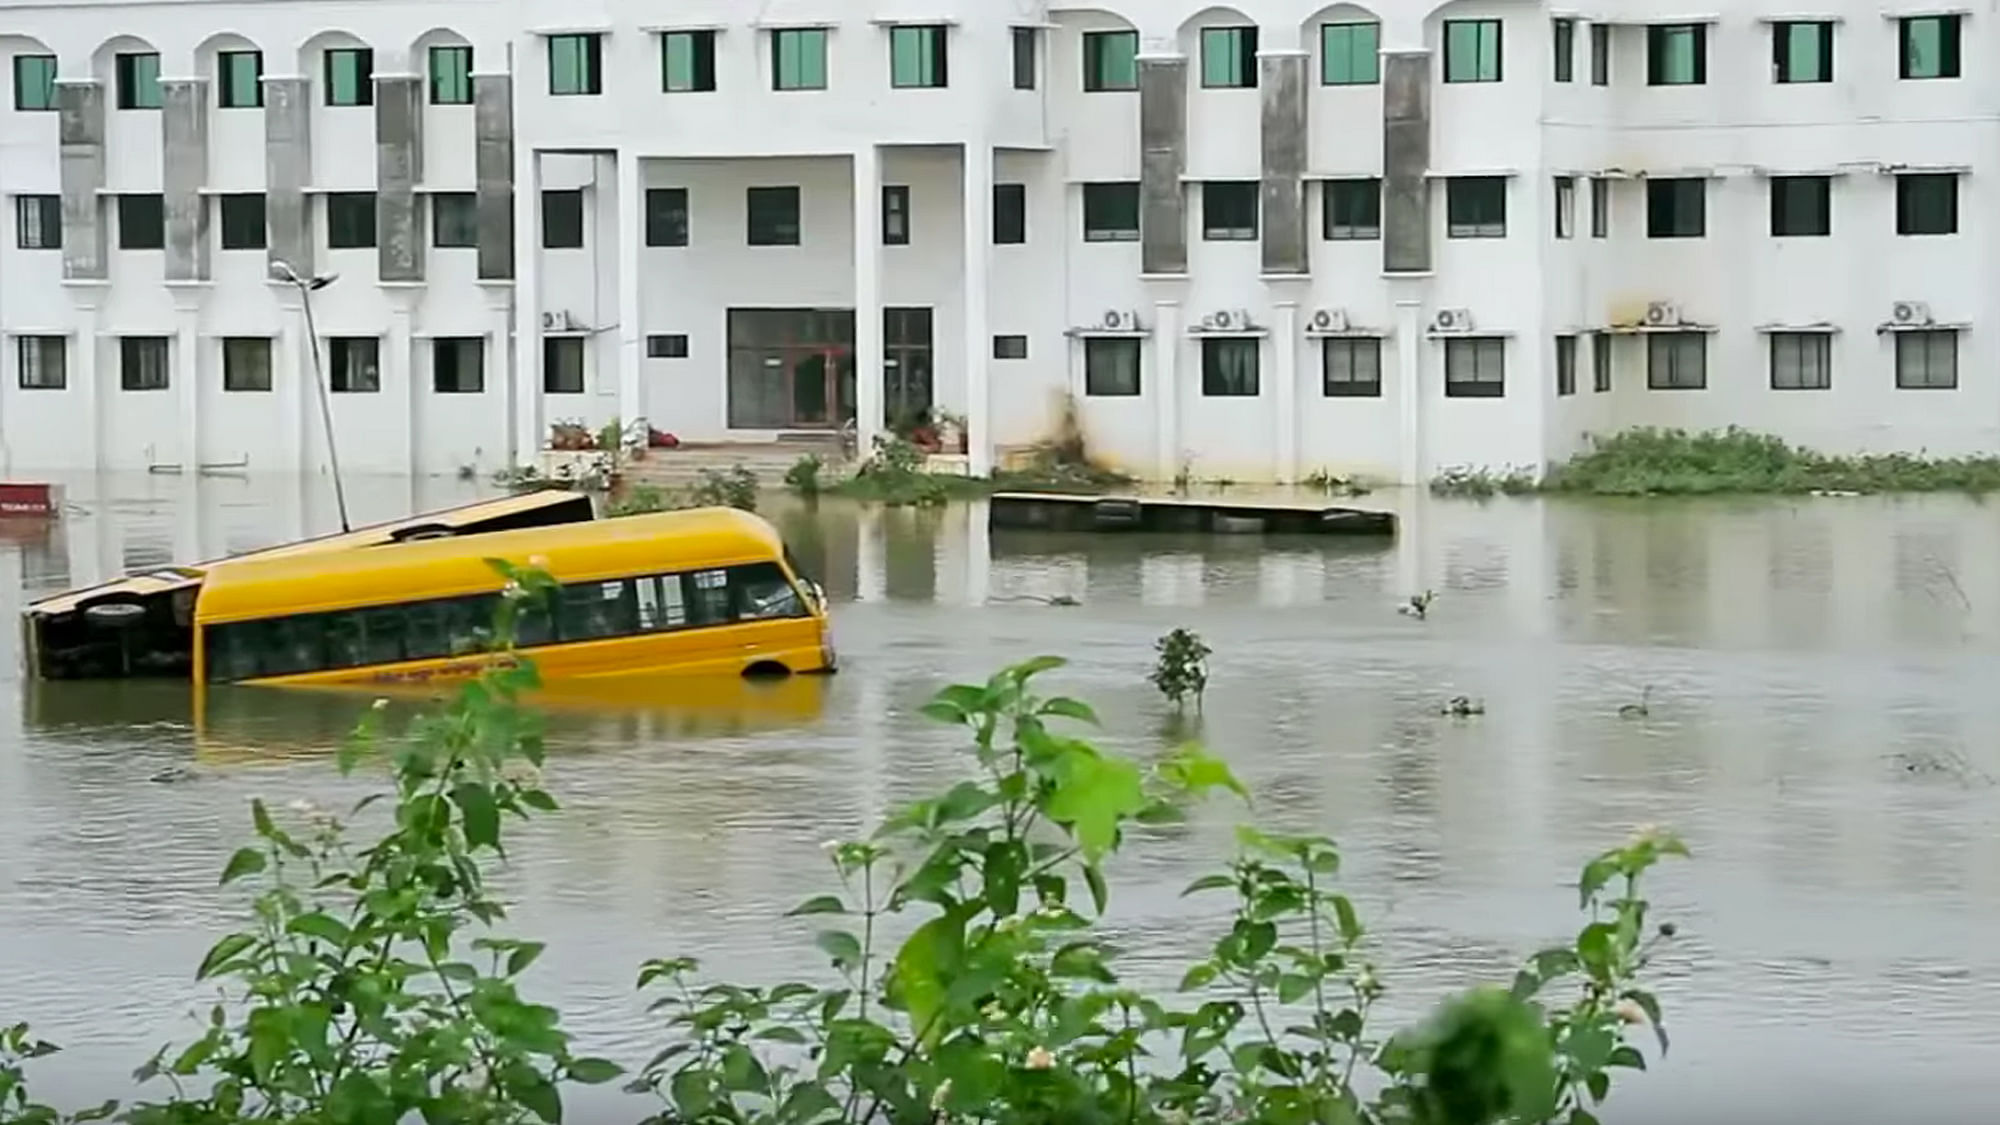 A bus almost submerged in water during the Chennai floods. (Photo Courtesy: Screengrab from the video)